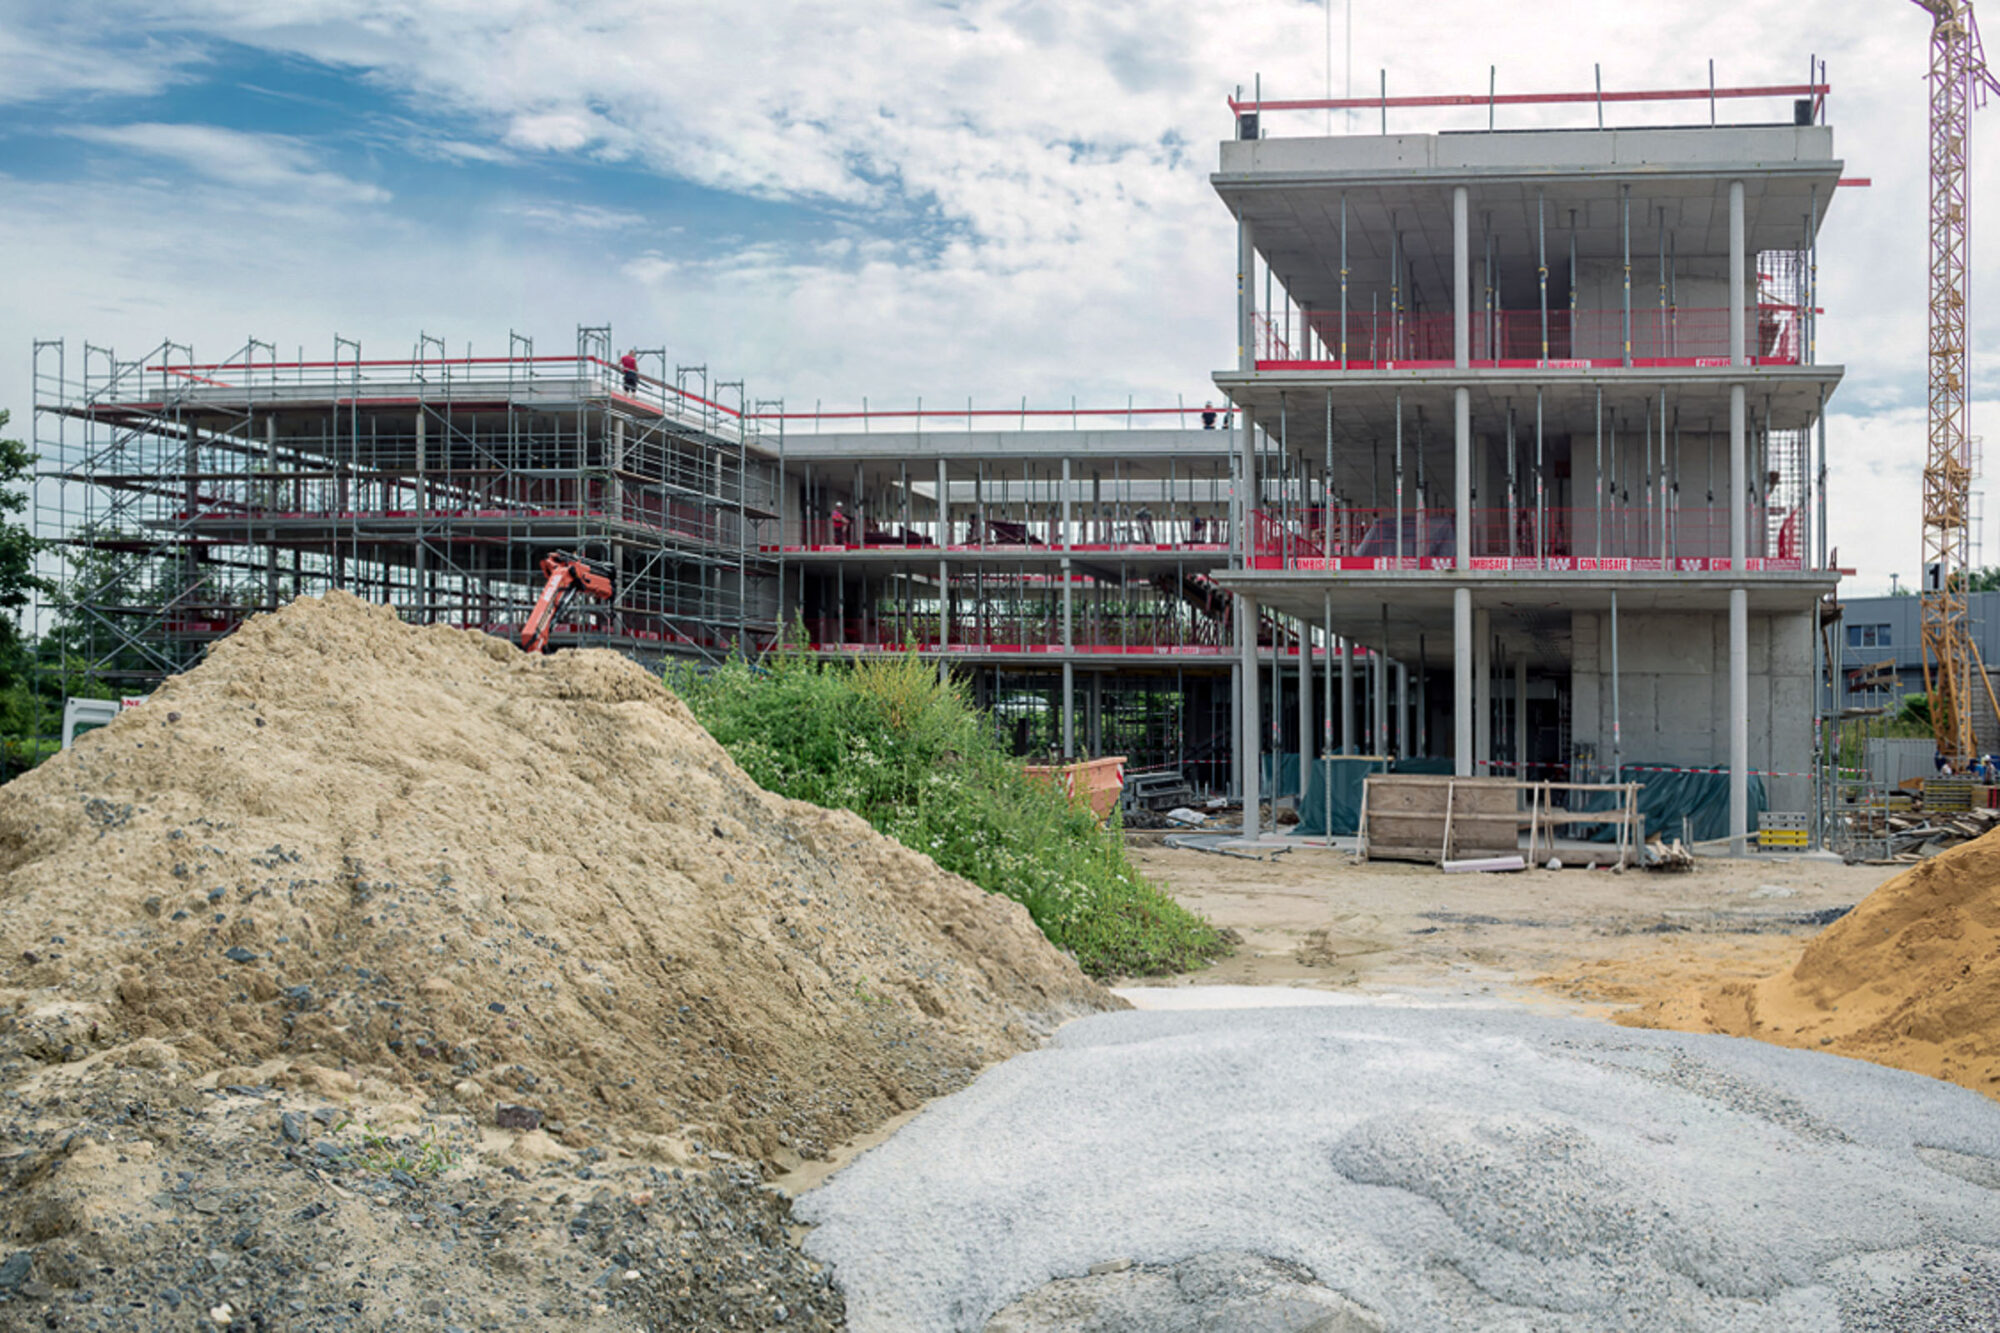 Construction site of the Turck sales and marketing headquarters, Mülheim/Ruhr